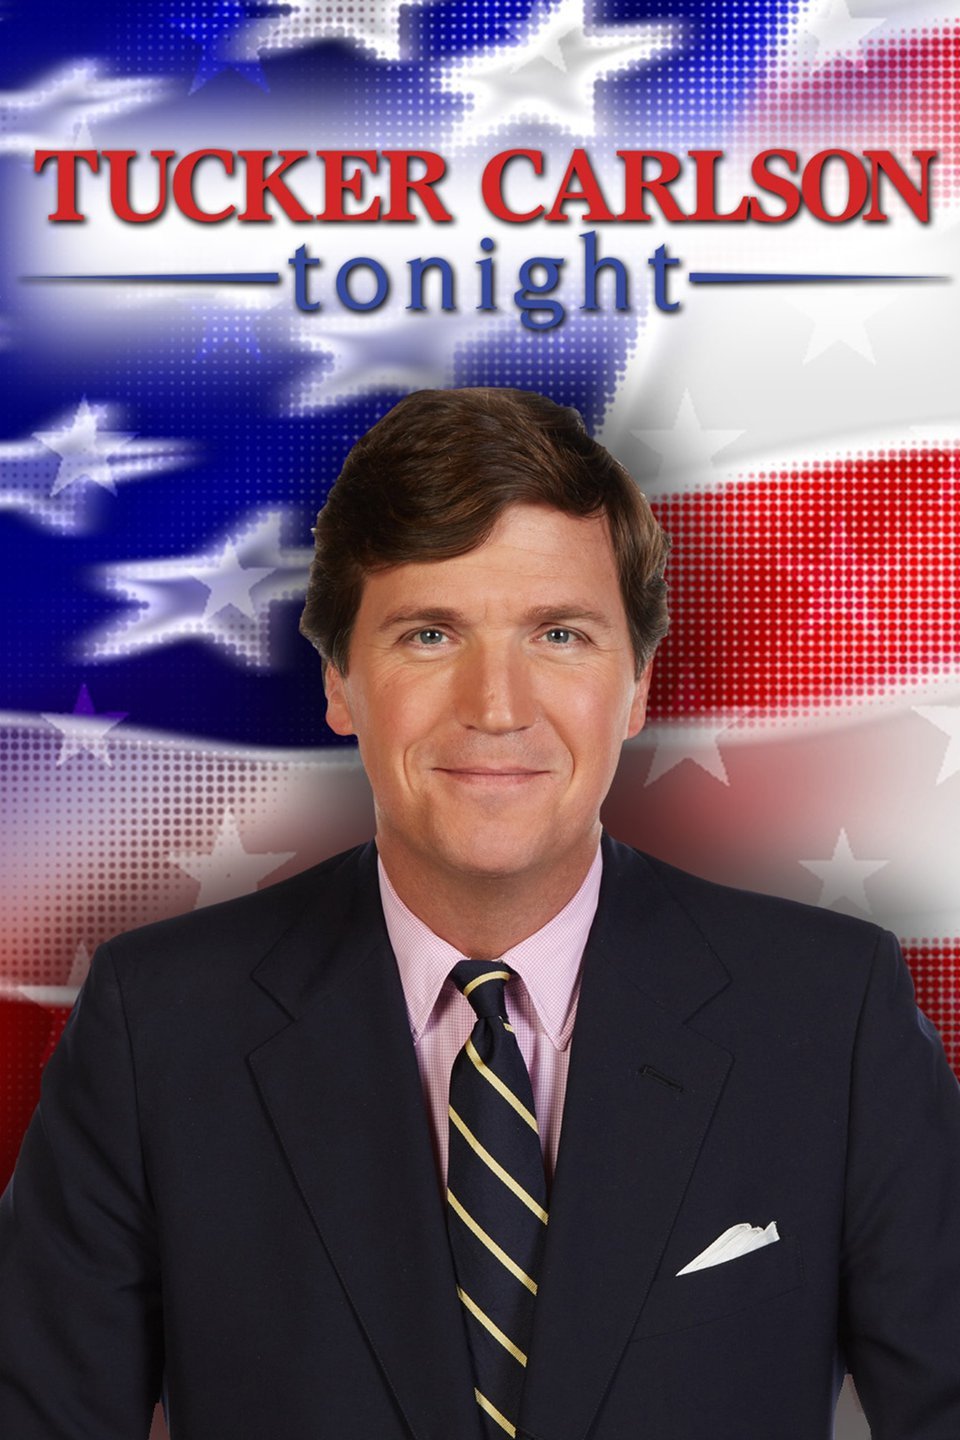 Tucker Carlson Tonight Watch for free online, Dish Channel, Salary, Net Worth and Wife